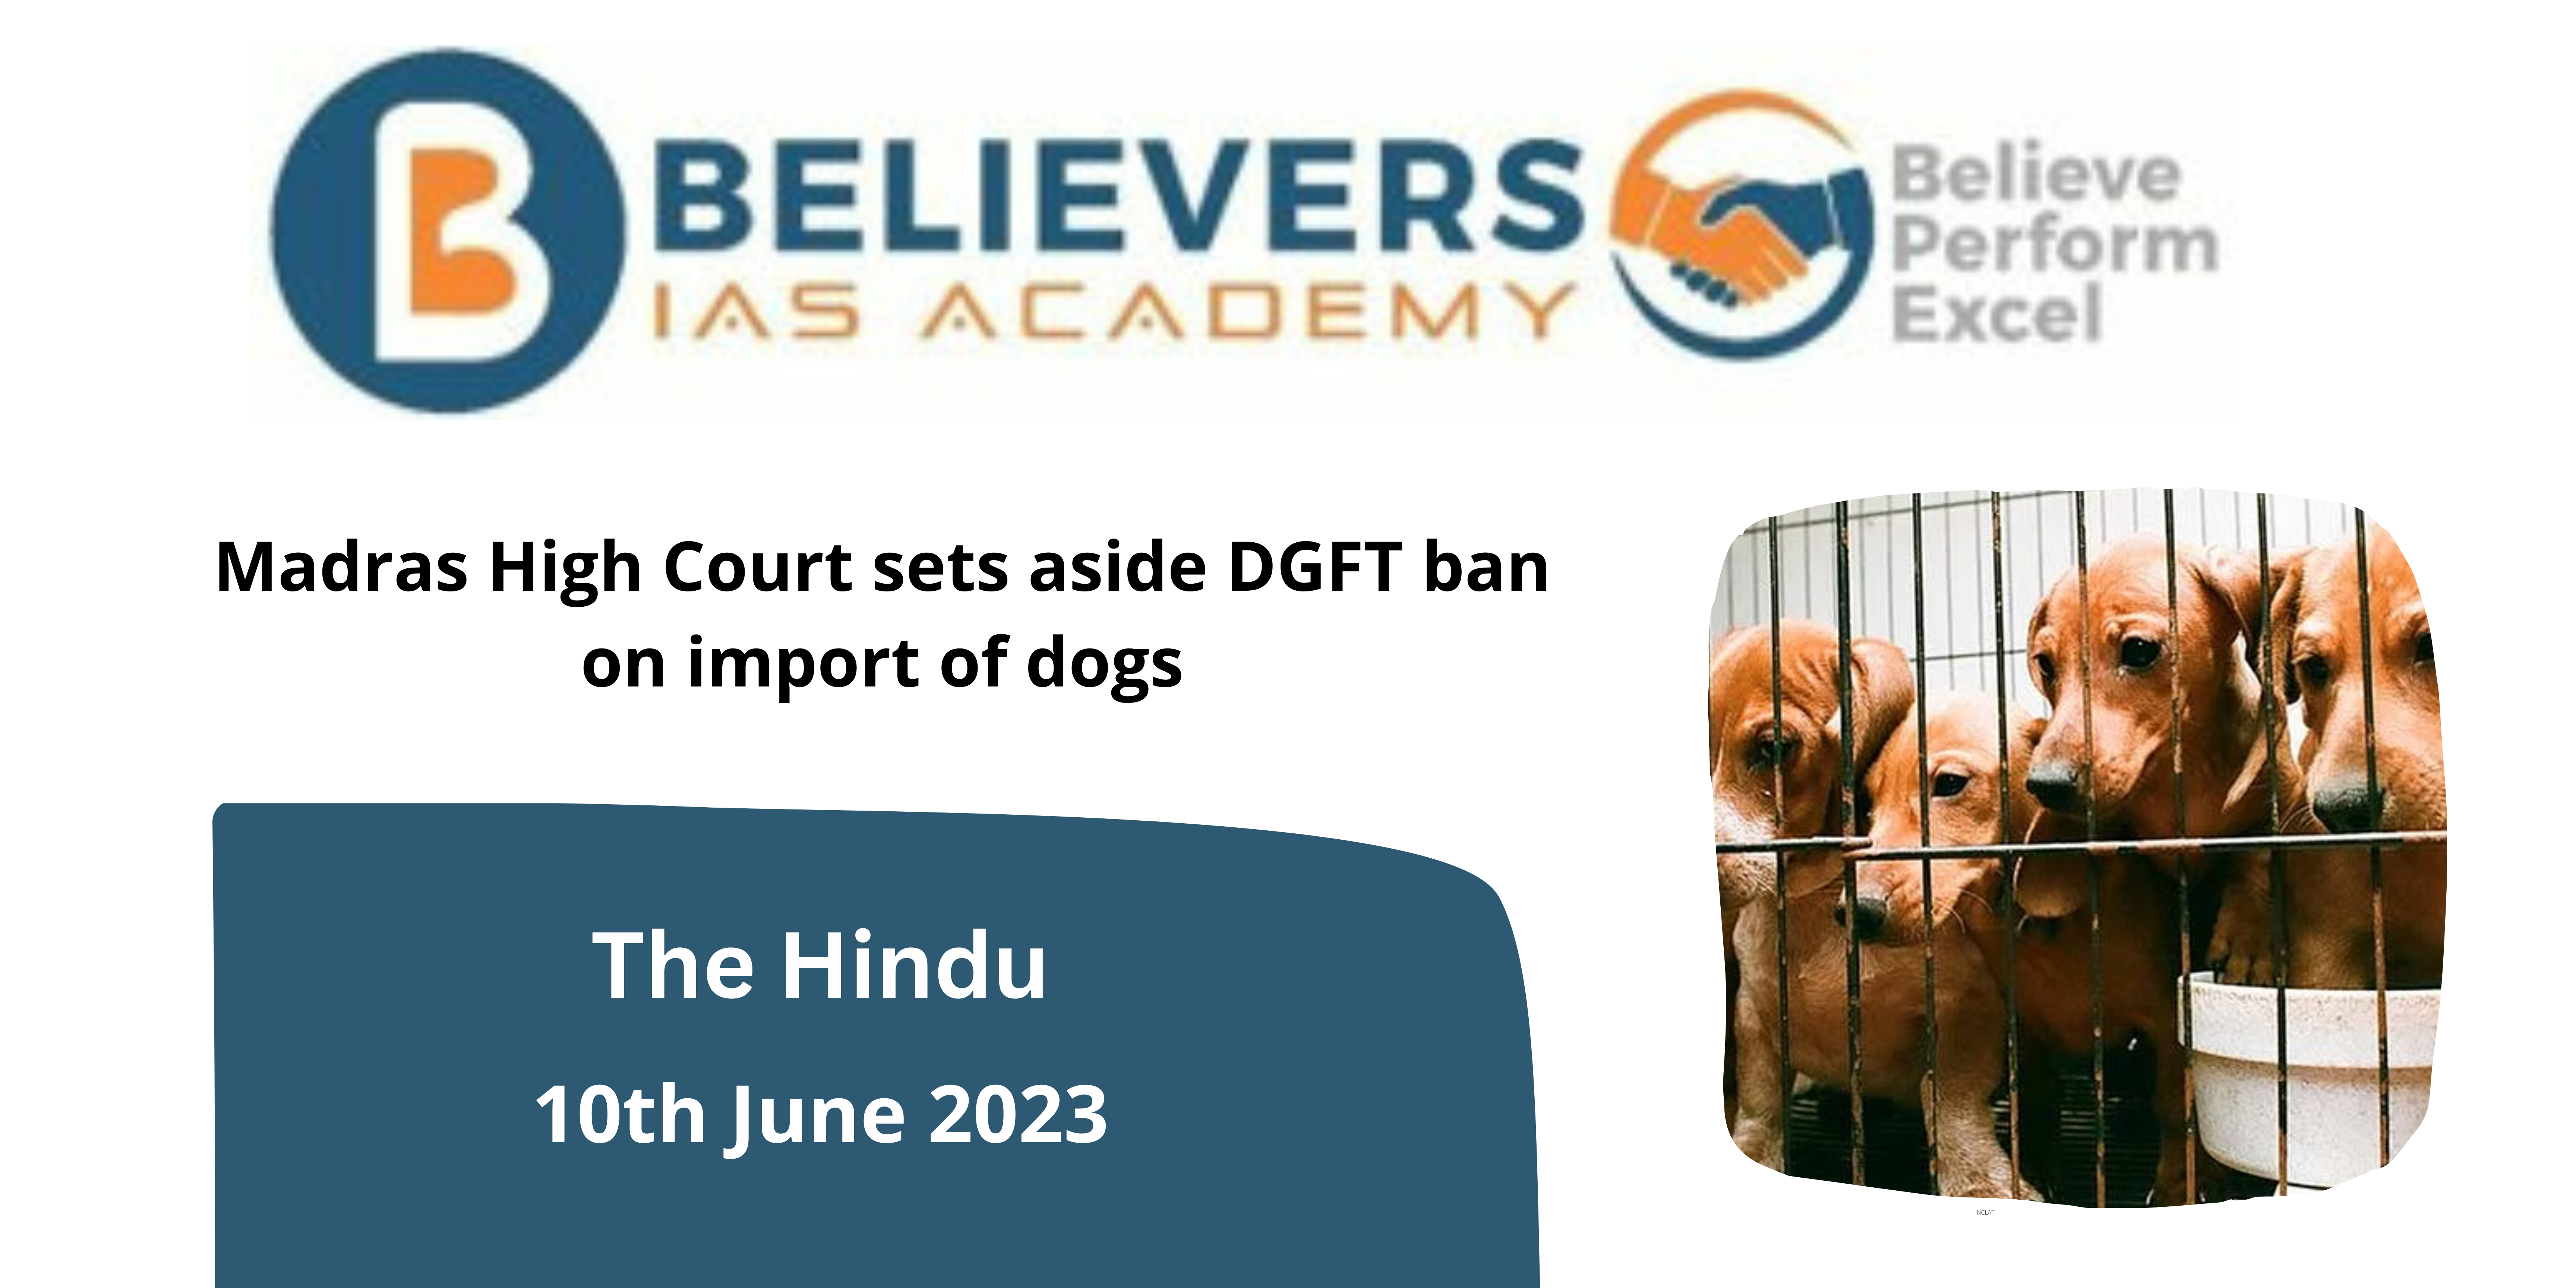 Madras High Court sets aside DGFT ban on import of dogs